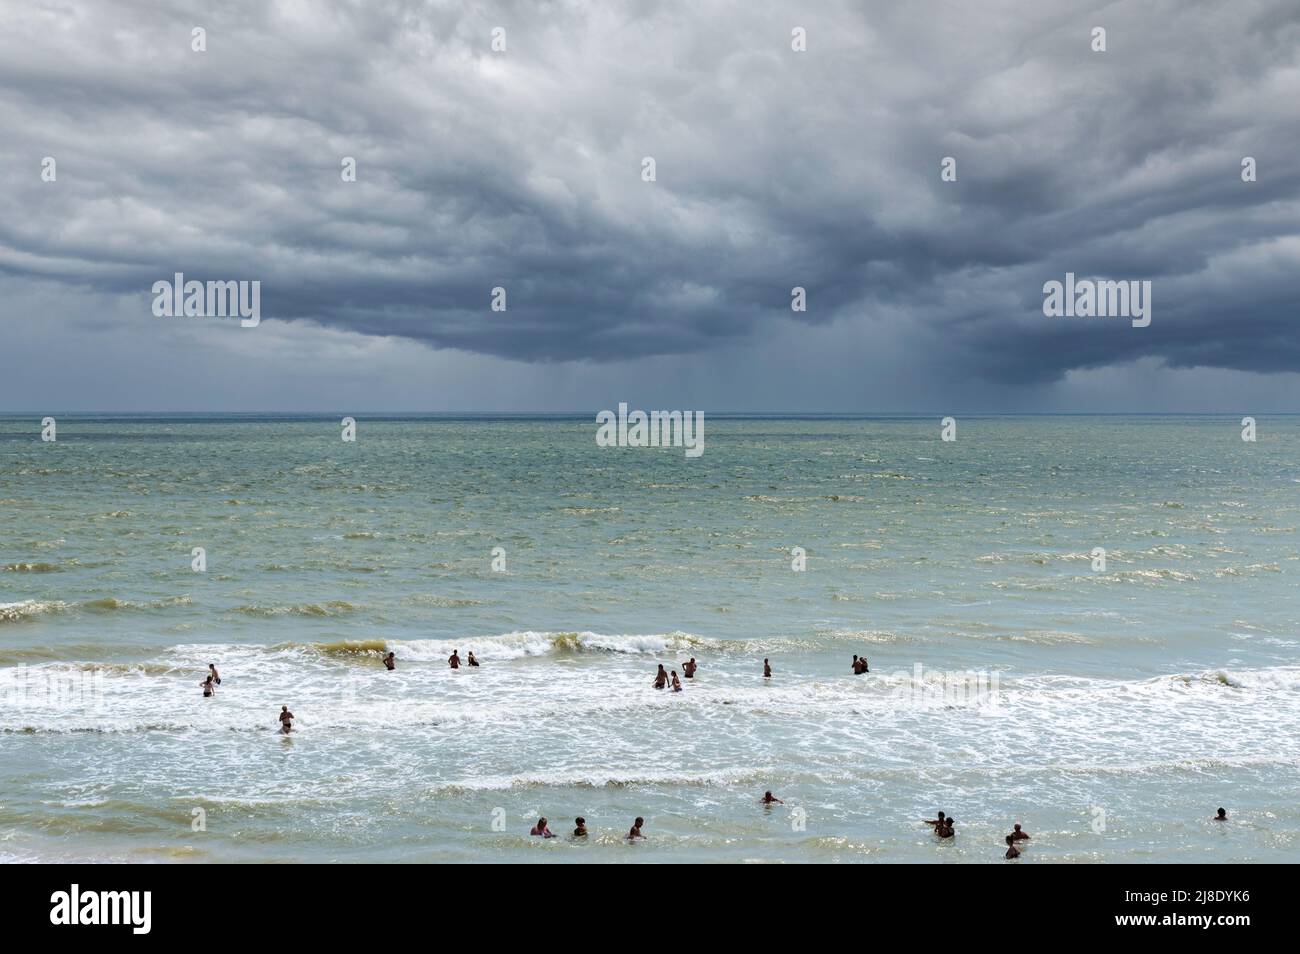 Sea beach before the storm. Thunderclouds are approaching the beach, rain in the distance. People want to swim in the sea despite the danger. Stock Photo